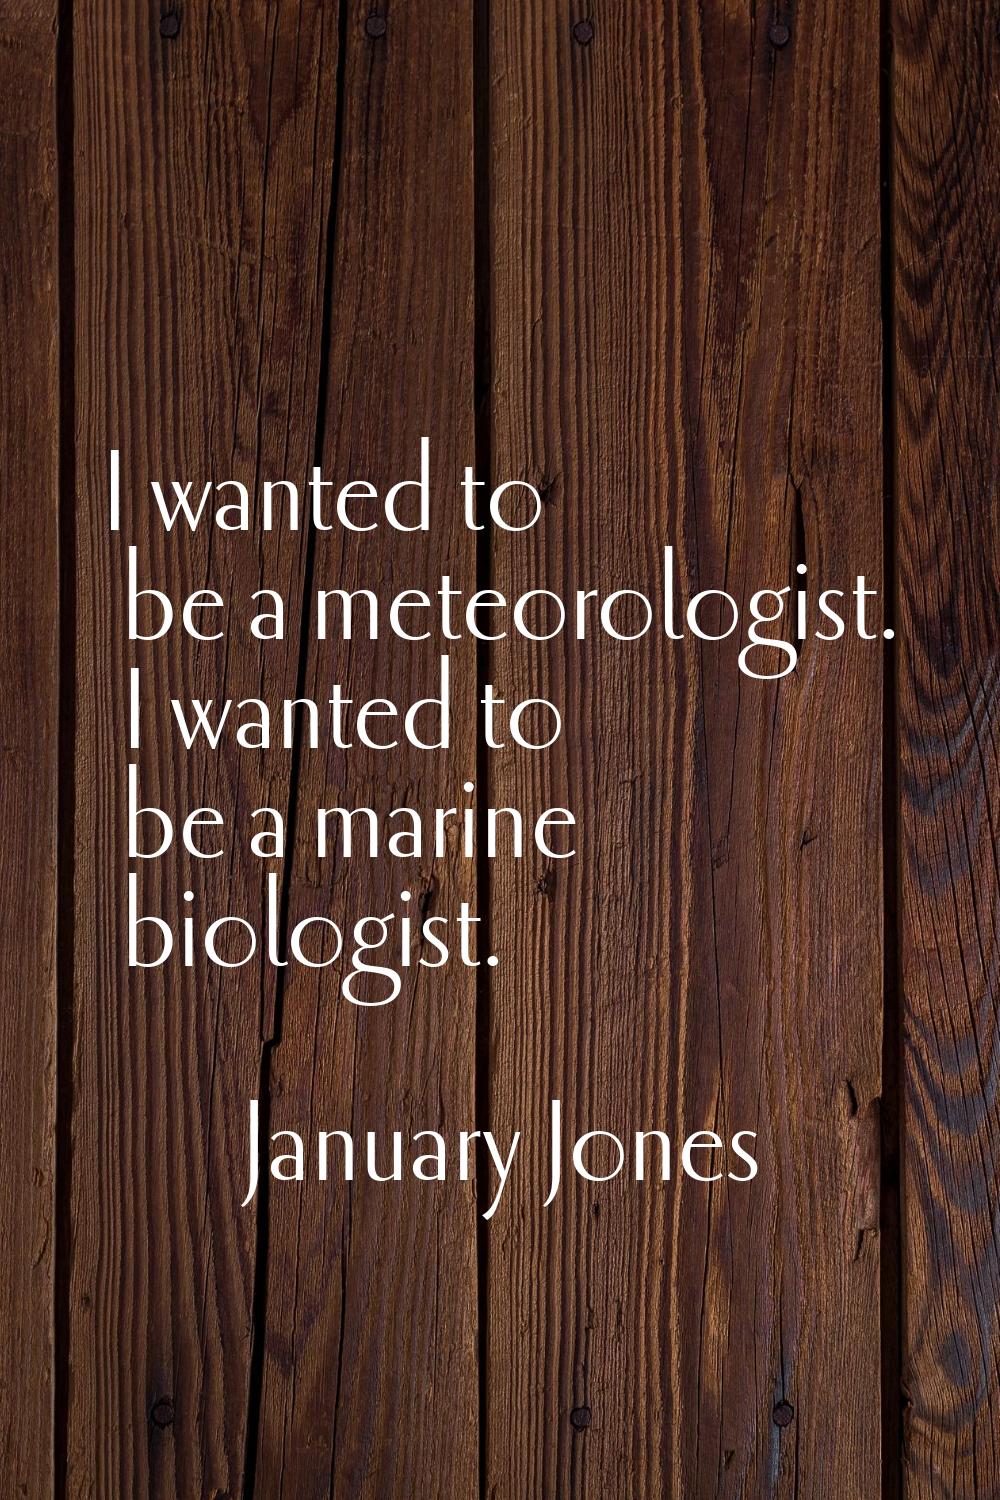 I wanted to be a meteorologist. I wanted to be a marine biologist.